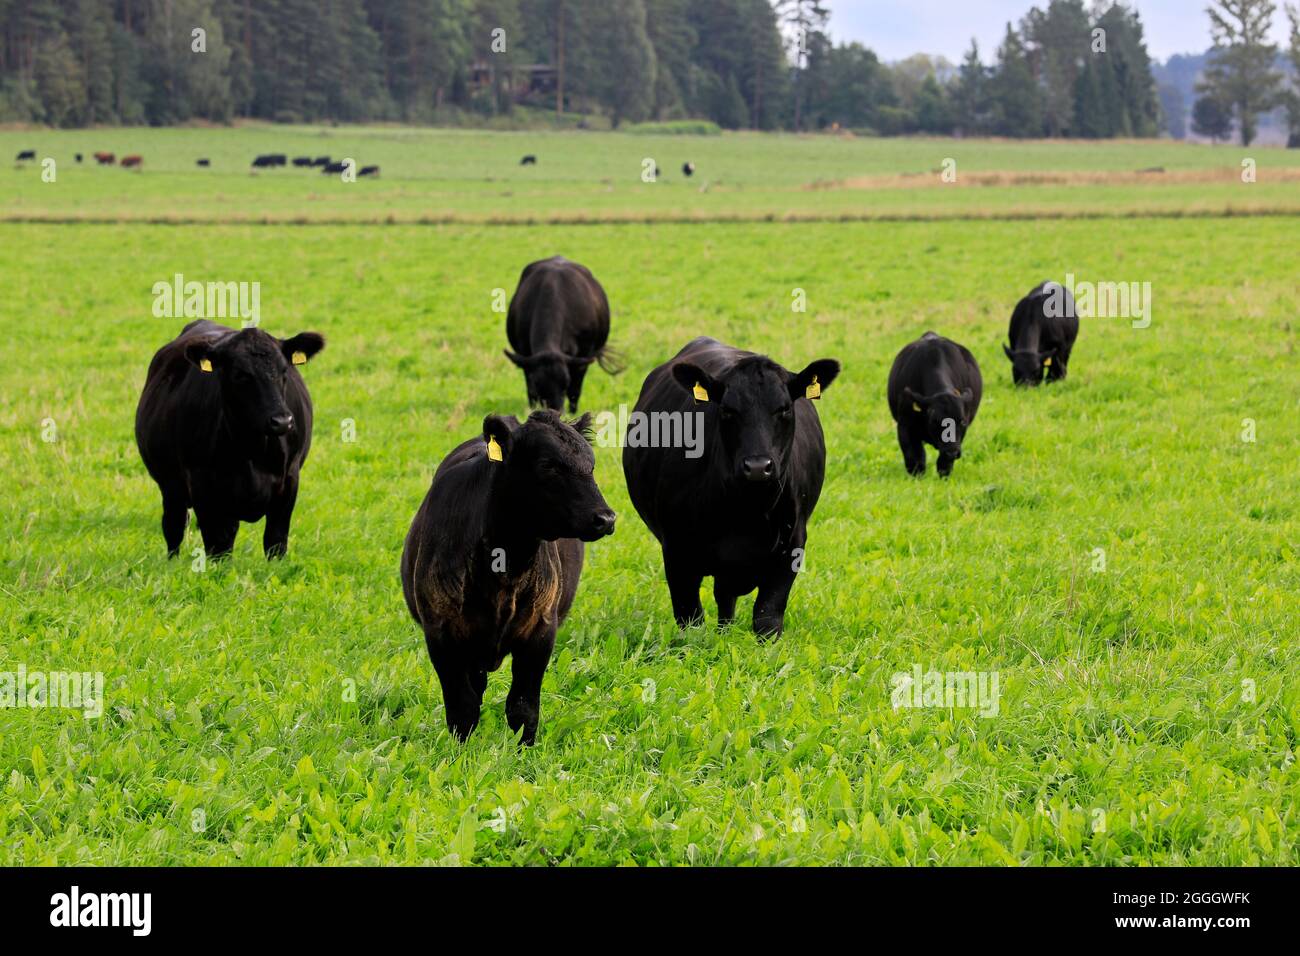 Black Aberdeen Angus cattle standing in green grassy field in Finland on a clear day of late summer. Angus is a Scottish breed of beef cattle. Stock Photo